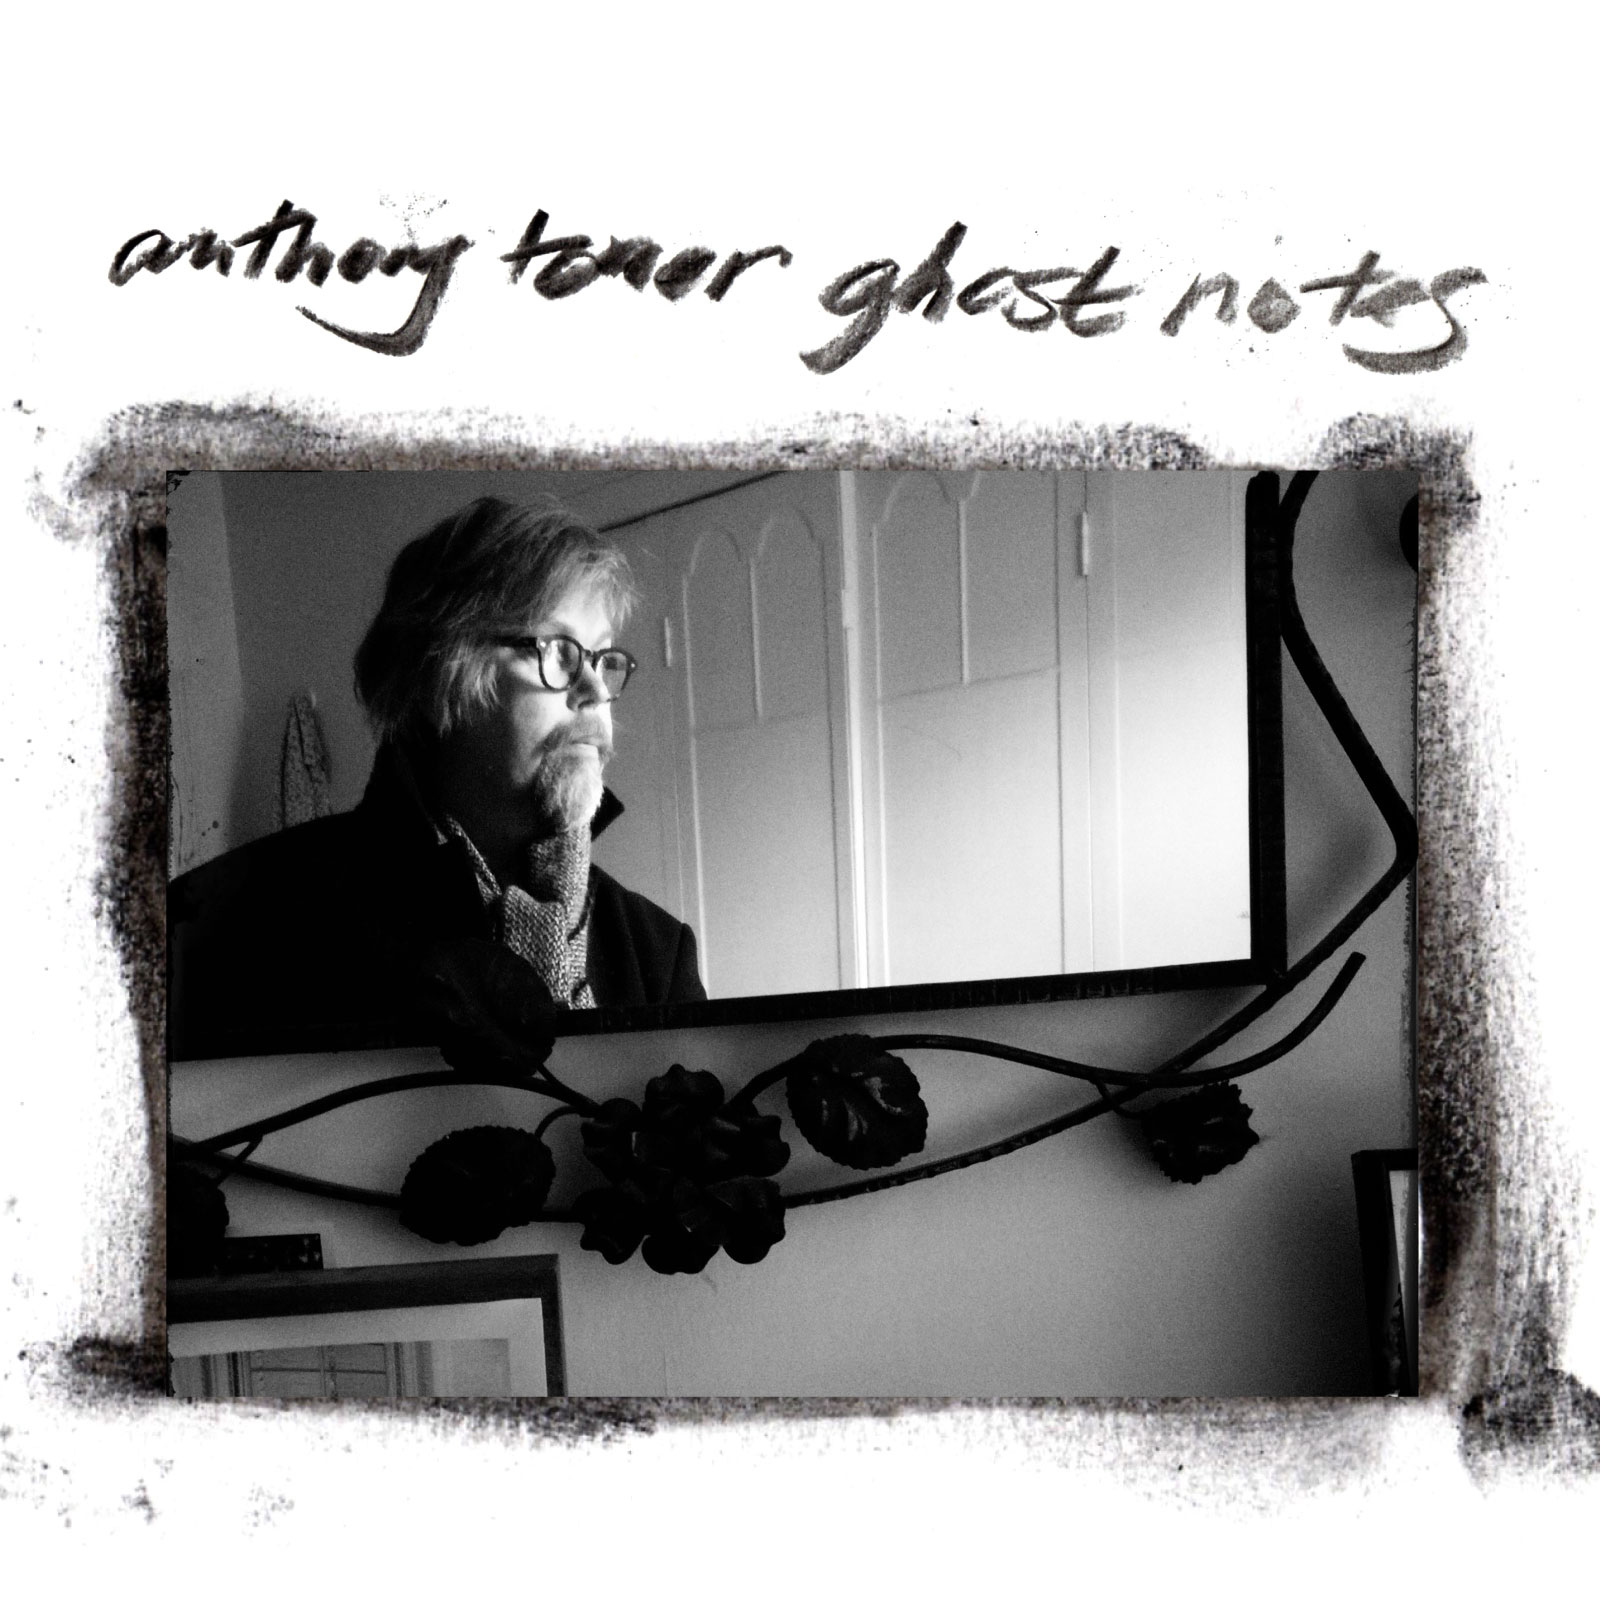 ANTHONY TONER releases new album Ghost Notes, Vol. 1 